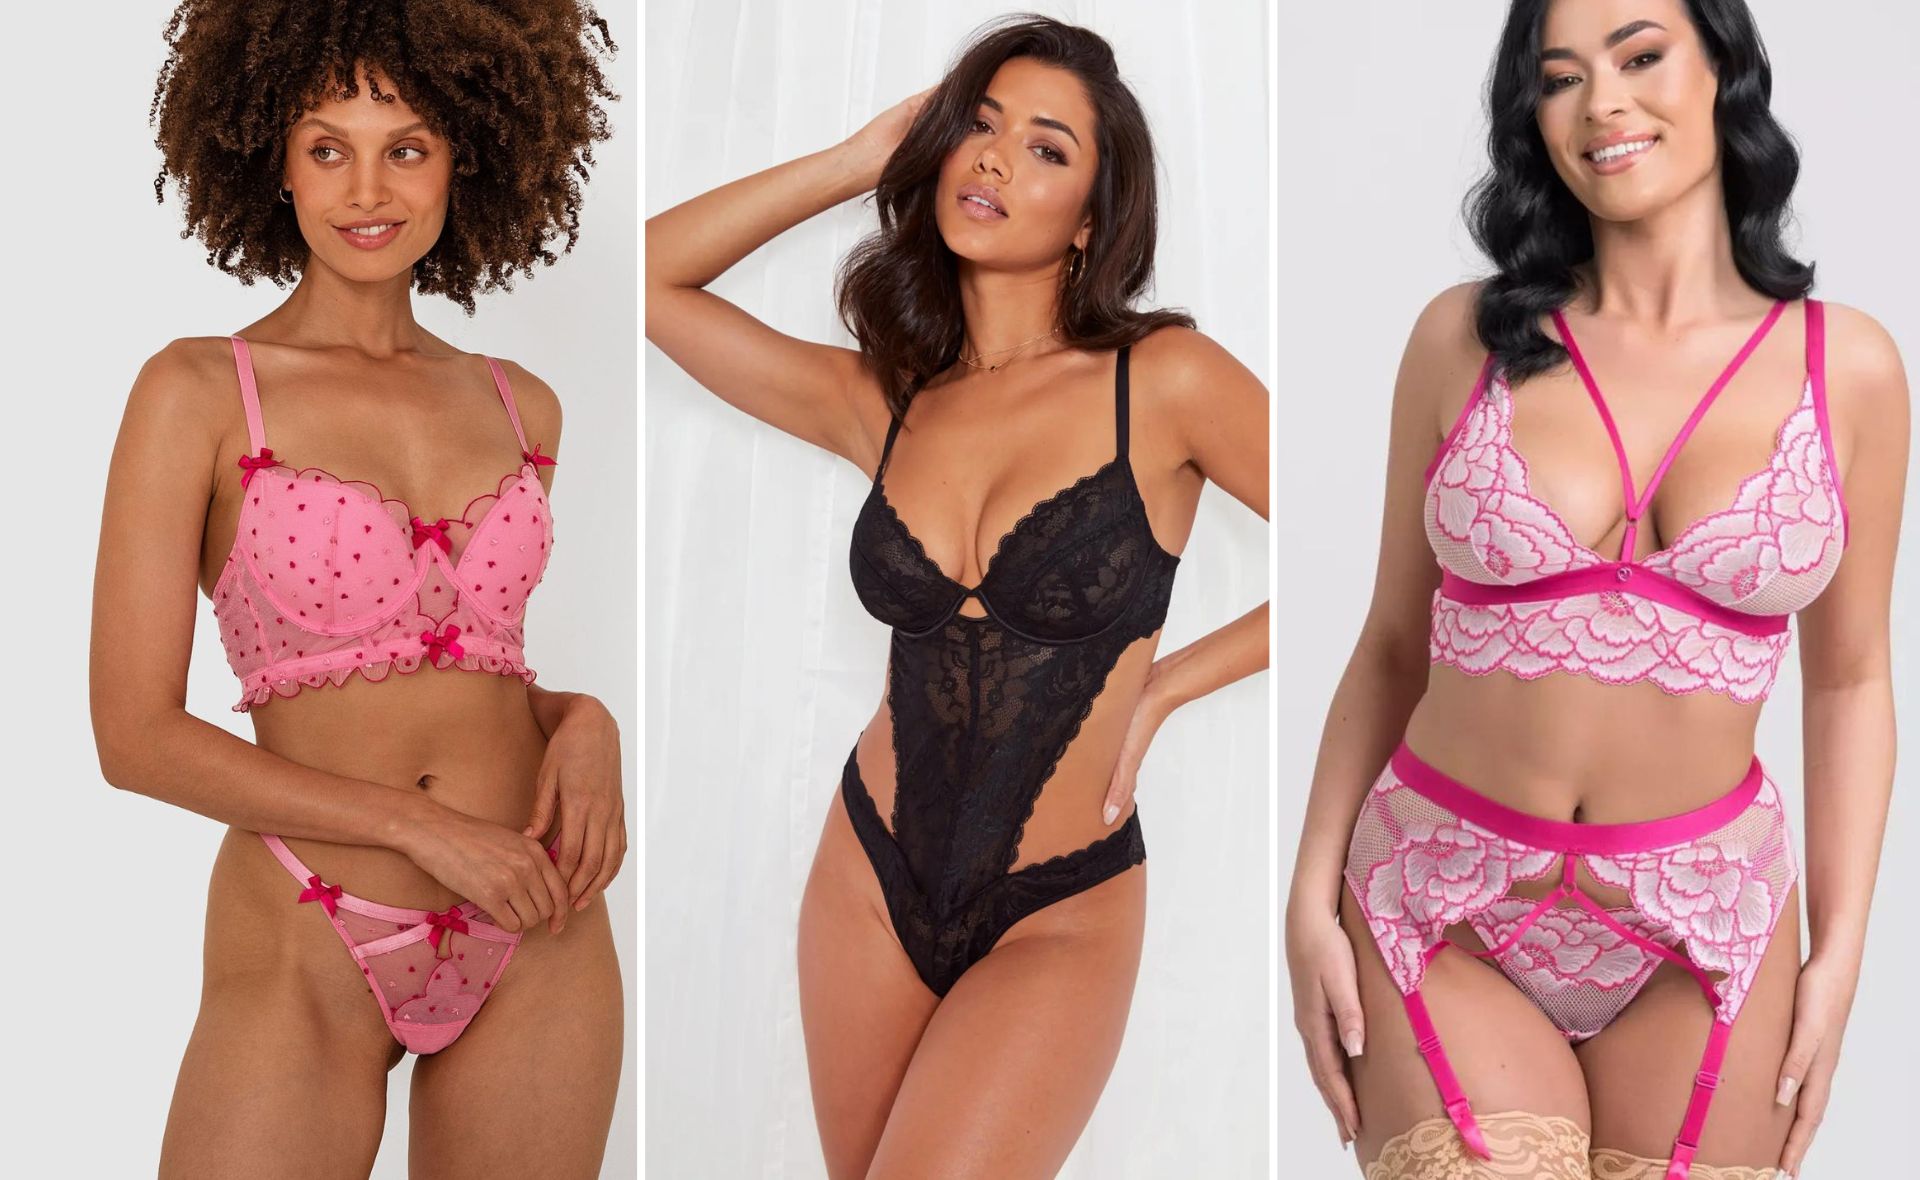 Spice up your underwear drawer with these stylish, sexy and sweet lingerie sets